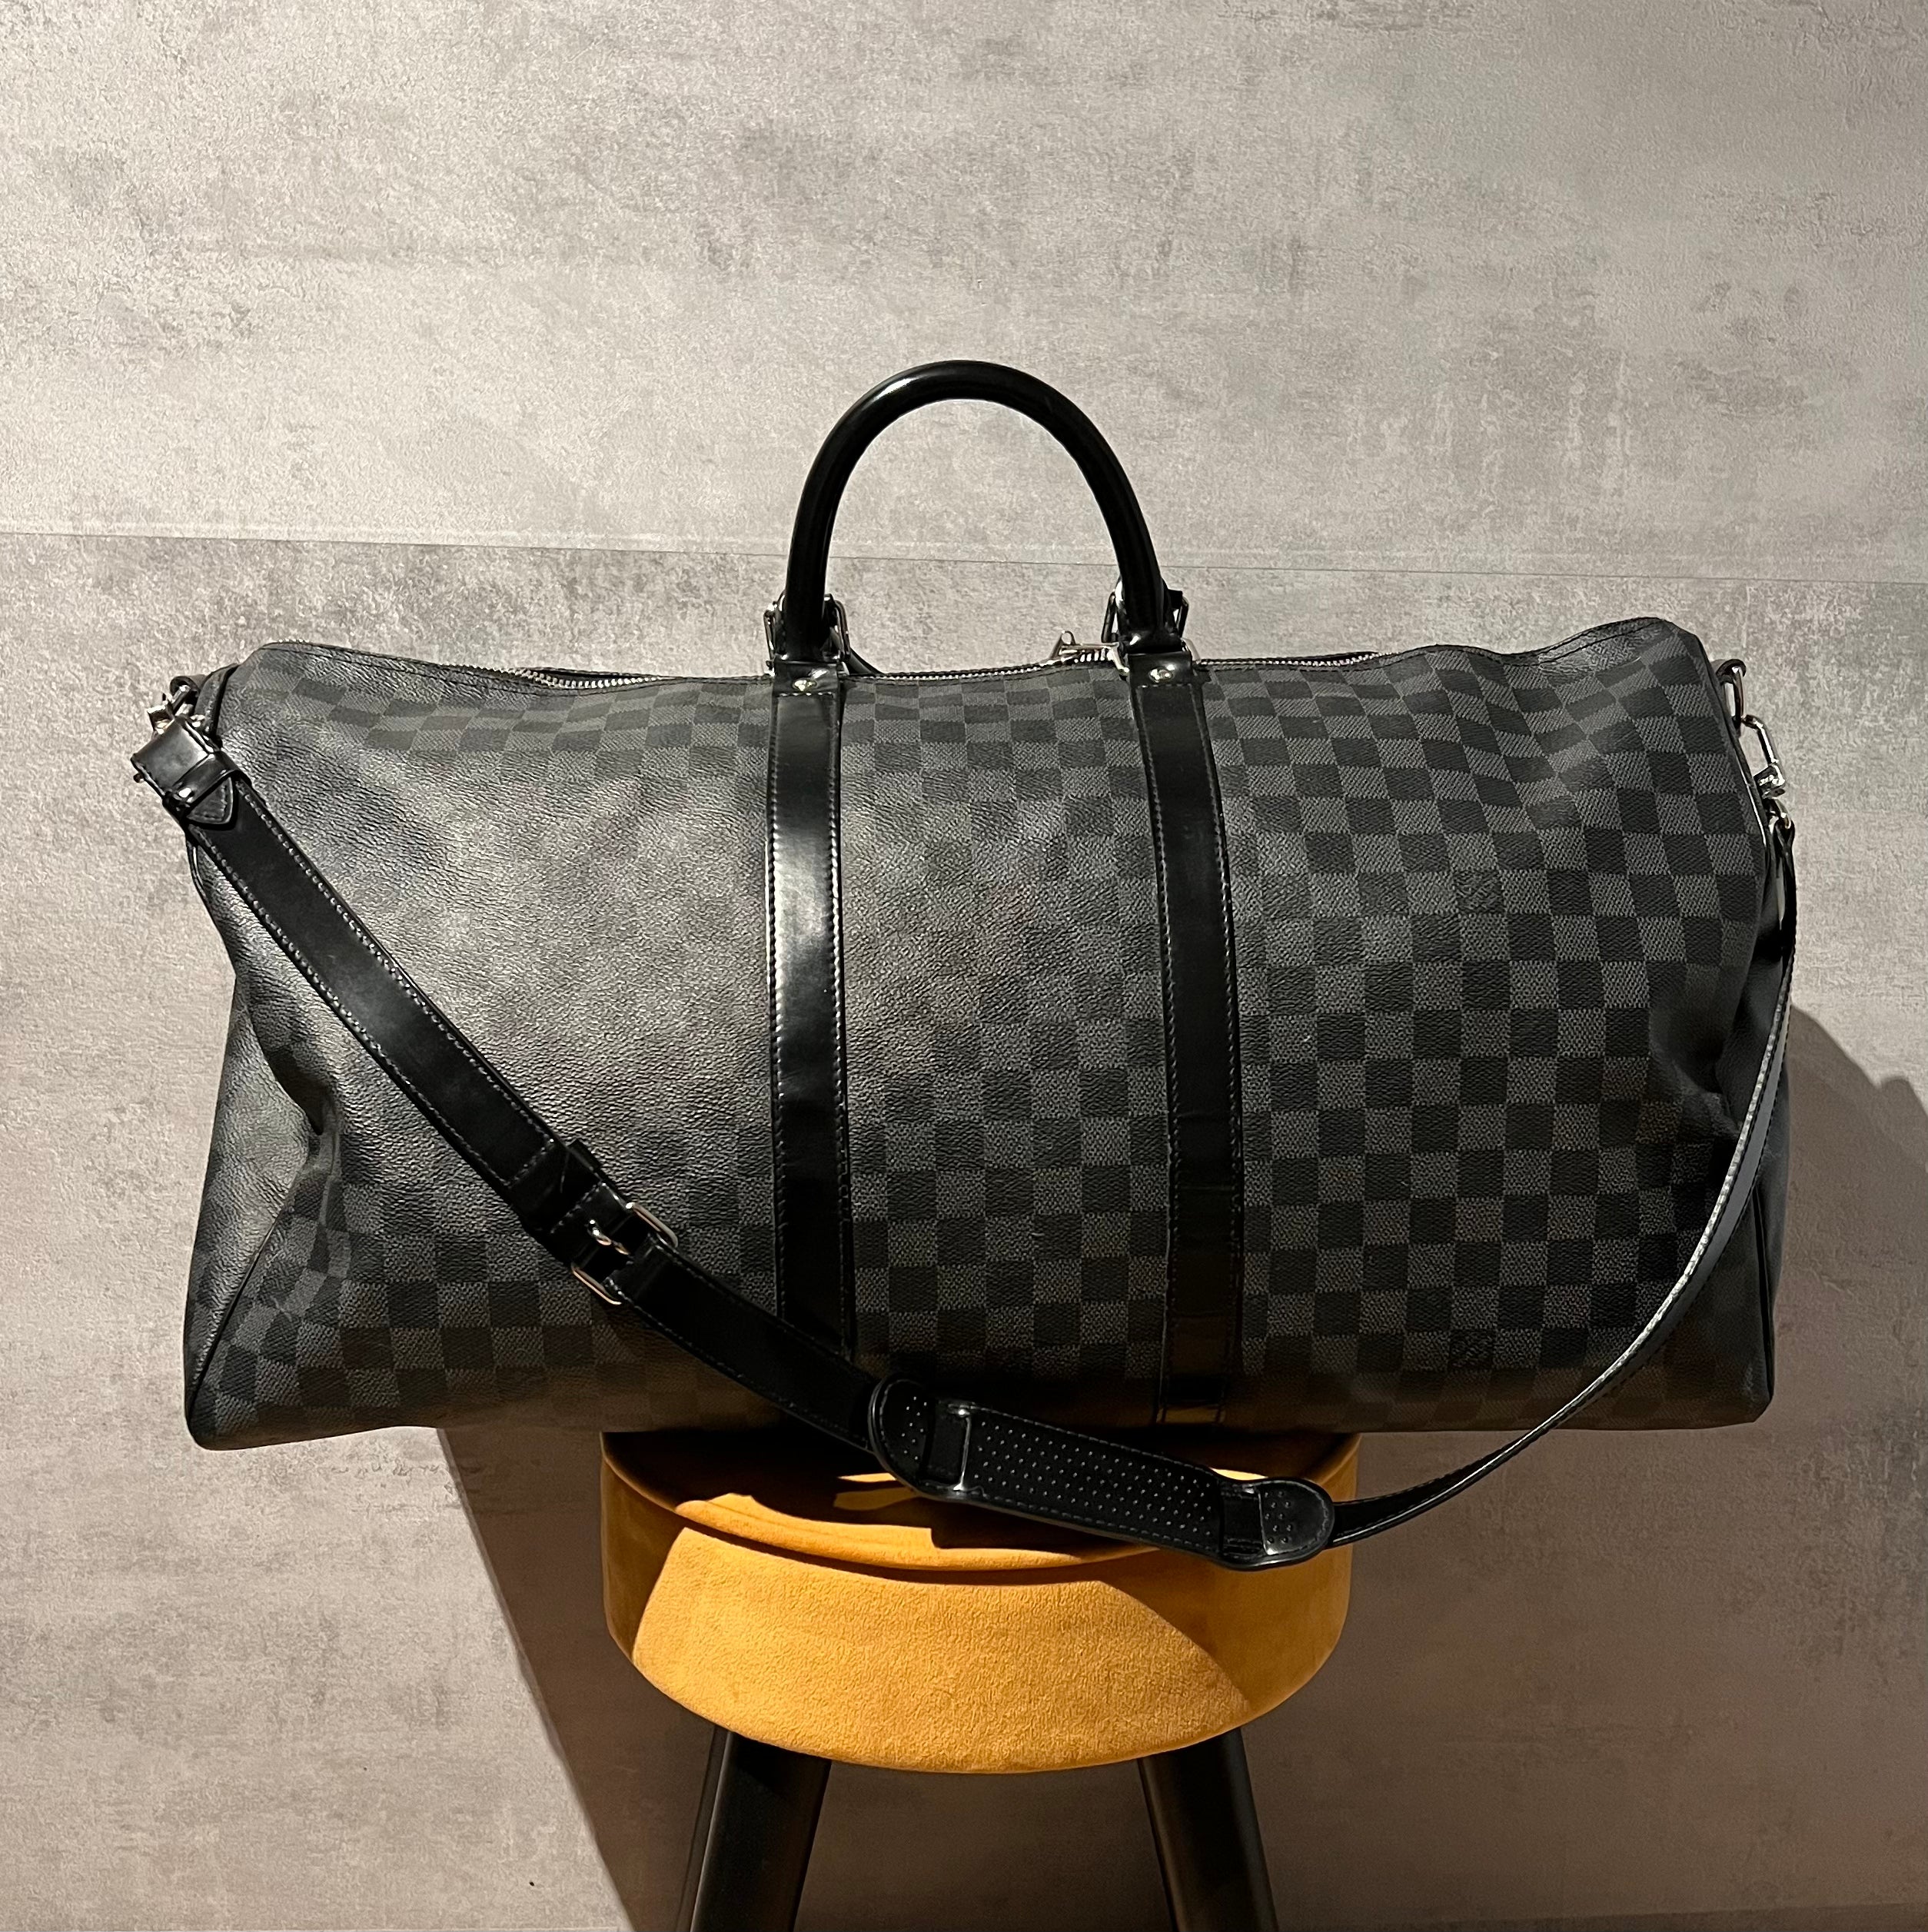 Products by Louis Vuitton: Keepall Bandoulière 55